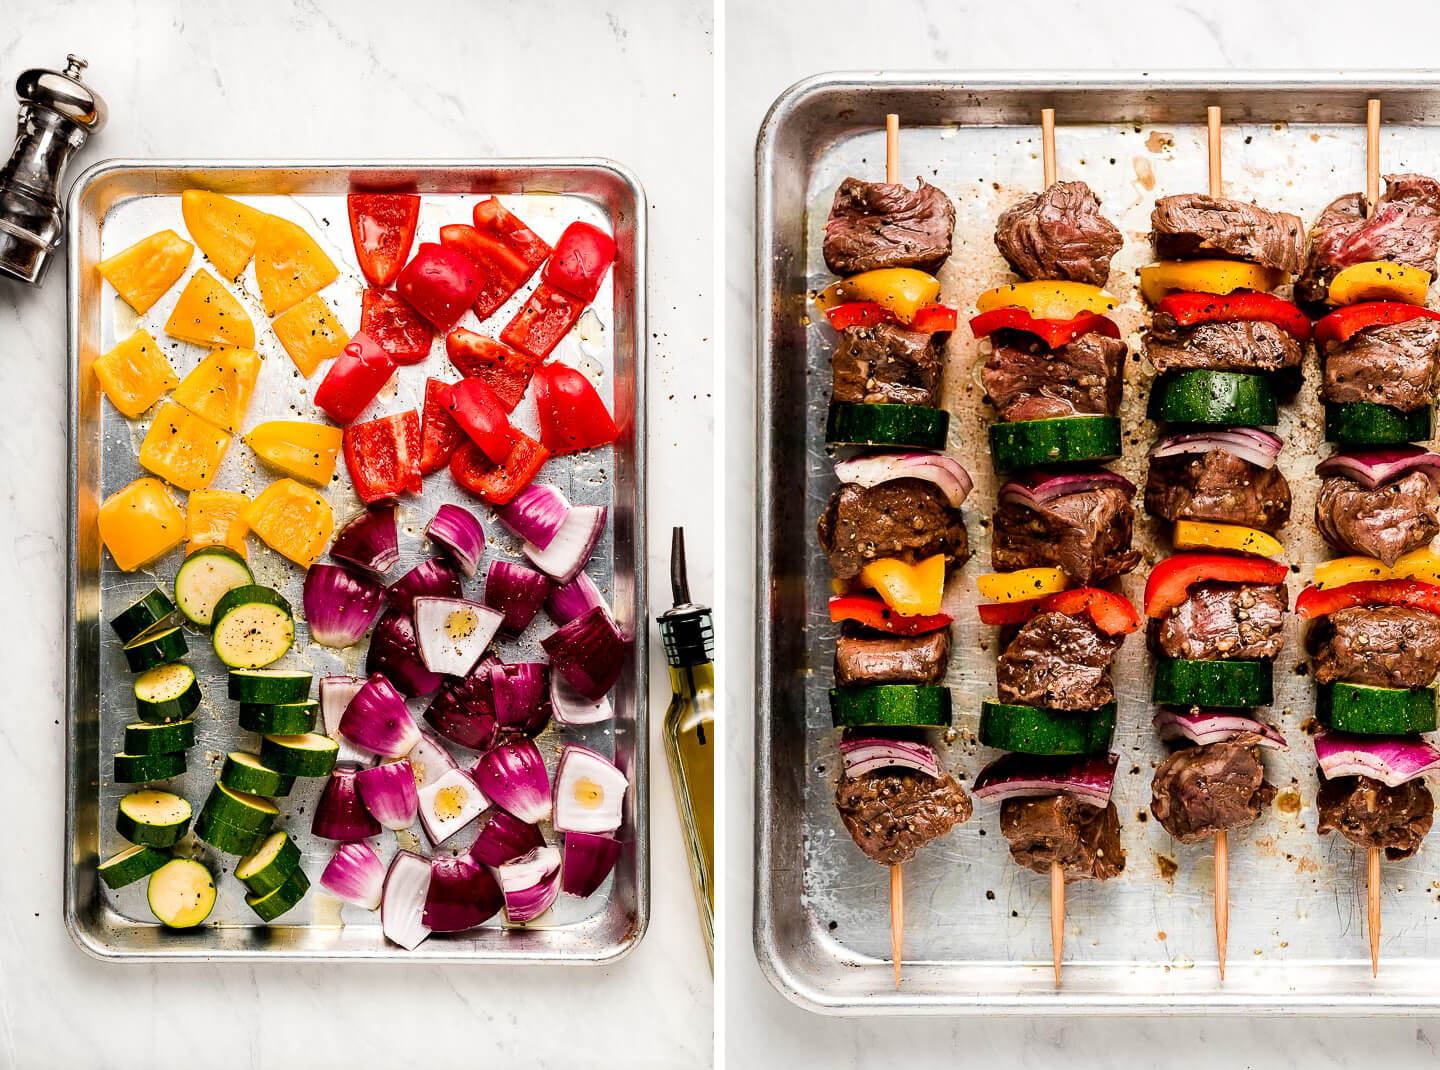 Diptych- A baking sheet with raw bell peppers, zucchini, and onions; vegetables and beef threaded on skewers.